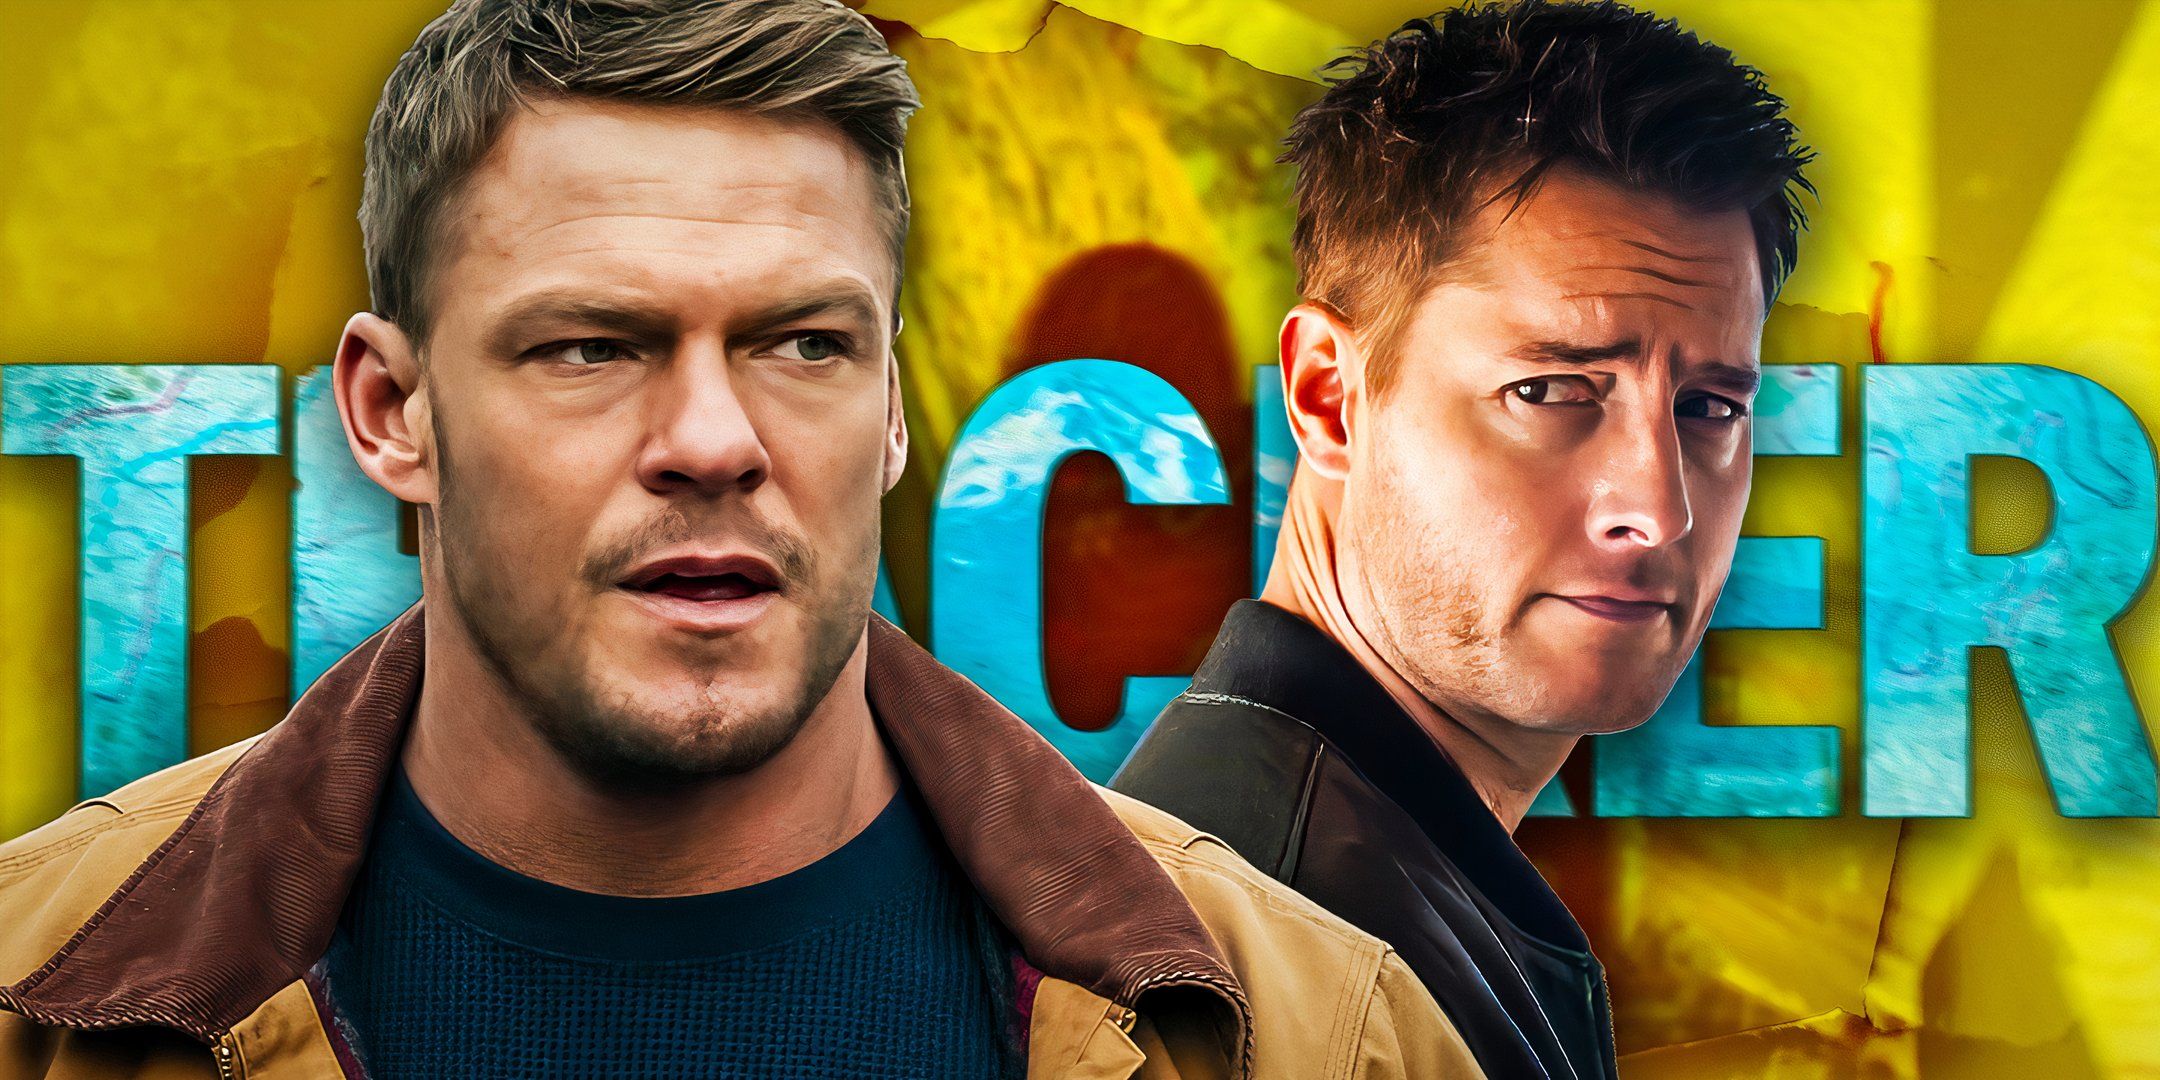 Alan Ritchson as Reacher in Reacher and Justin Hartley as Colter Shaw in Tracker